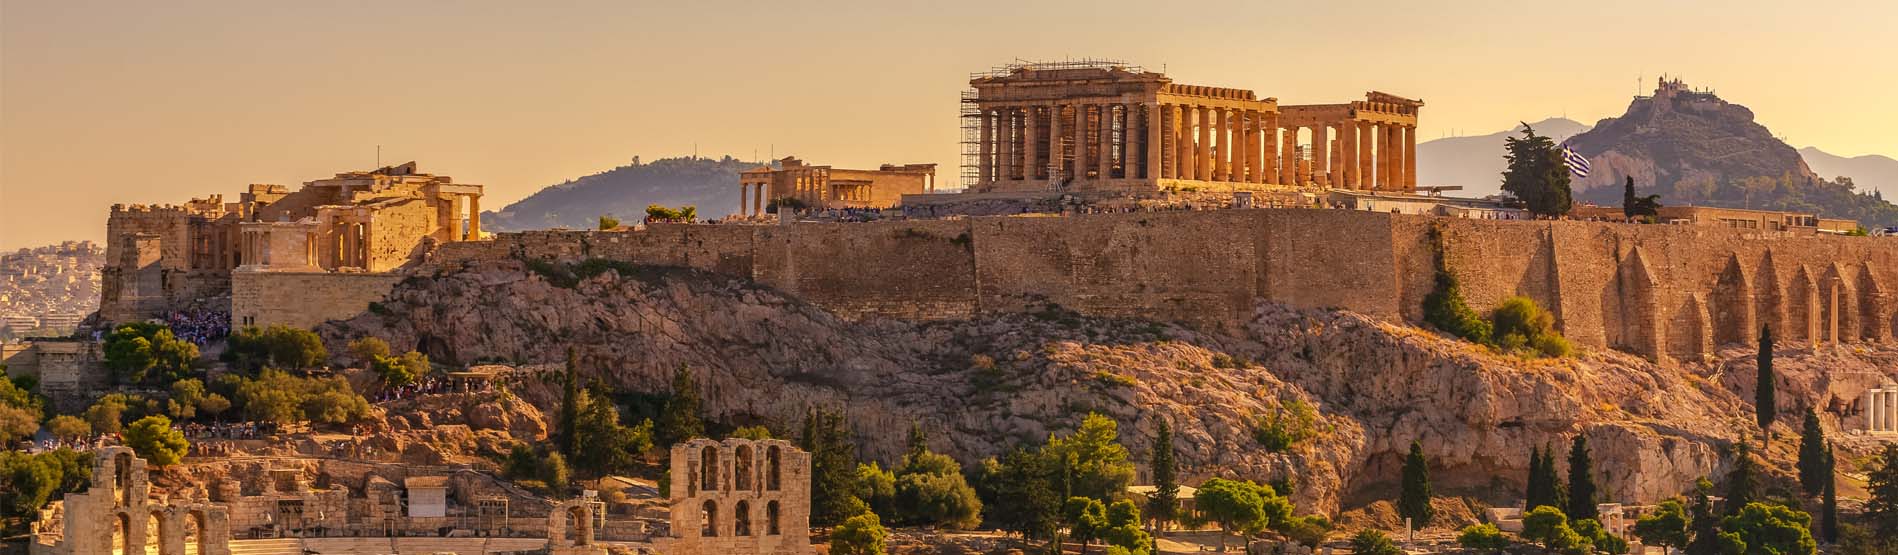 image of old buildings in Greece during the sunrise